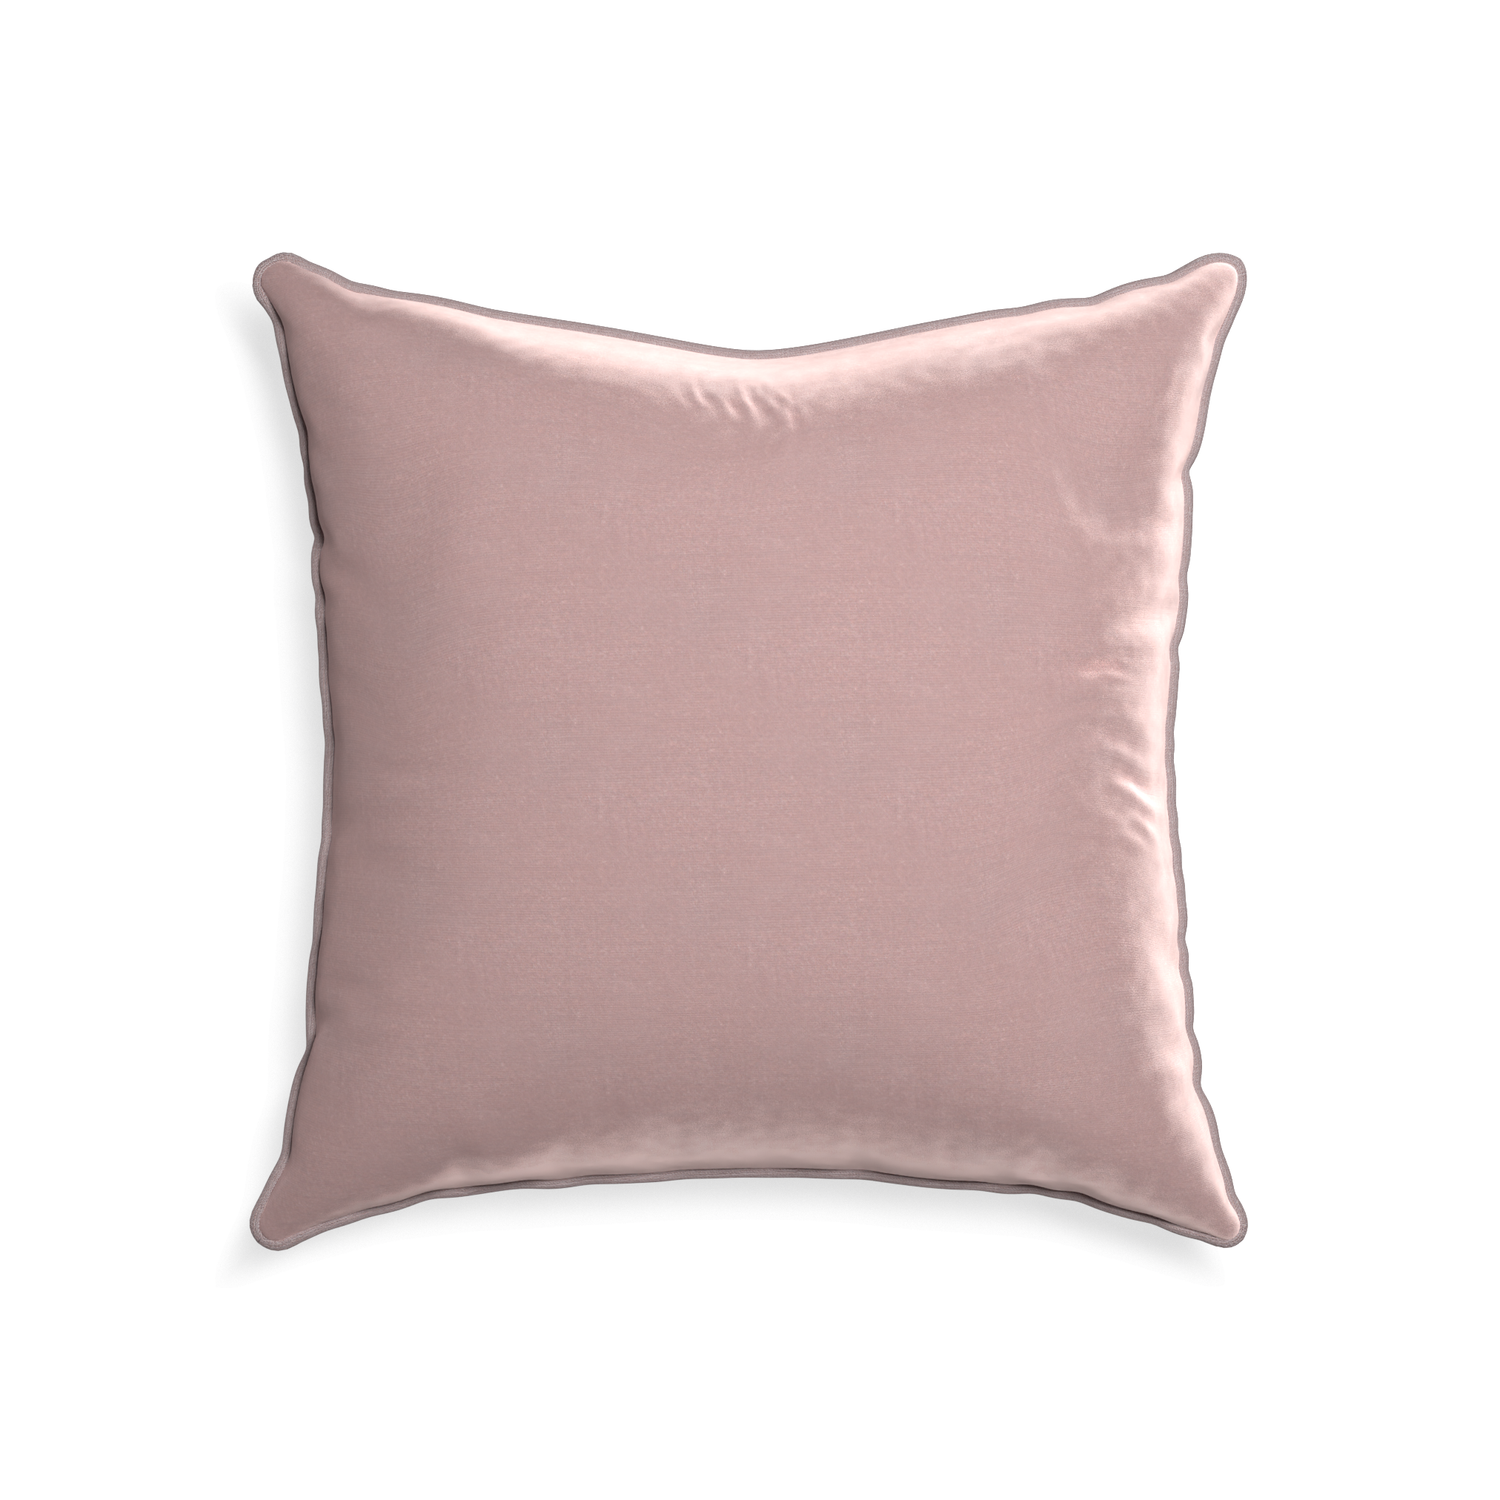 22-square mauve velvet custom mauvepillow with orchid piping on white background